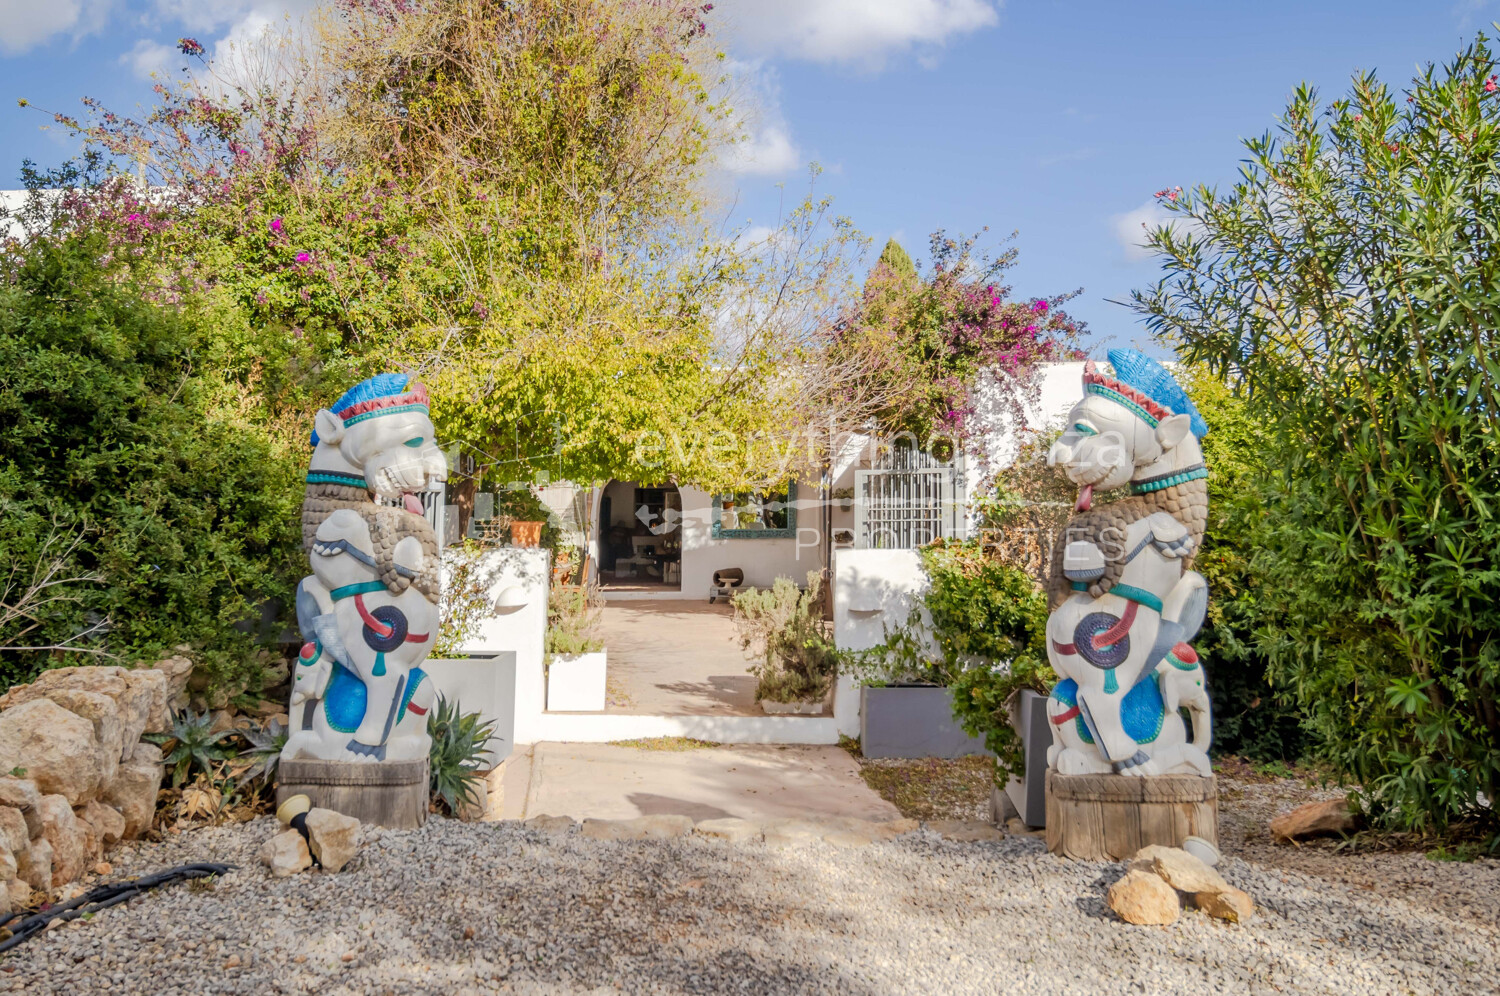 Unique Restored Finca Offering Business and Residential Licenses in Santa Gertrudis, ref. 1665, for sale in Ibiza by everything ibiza Properties